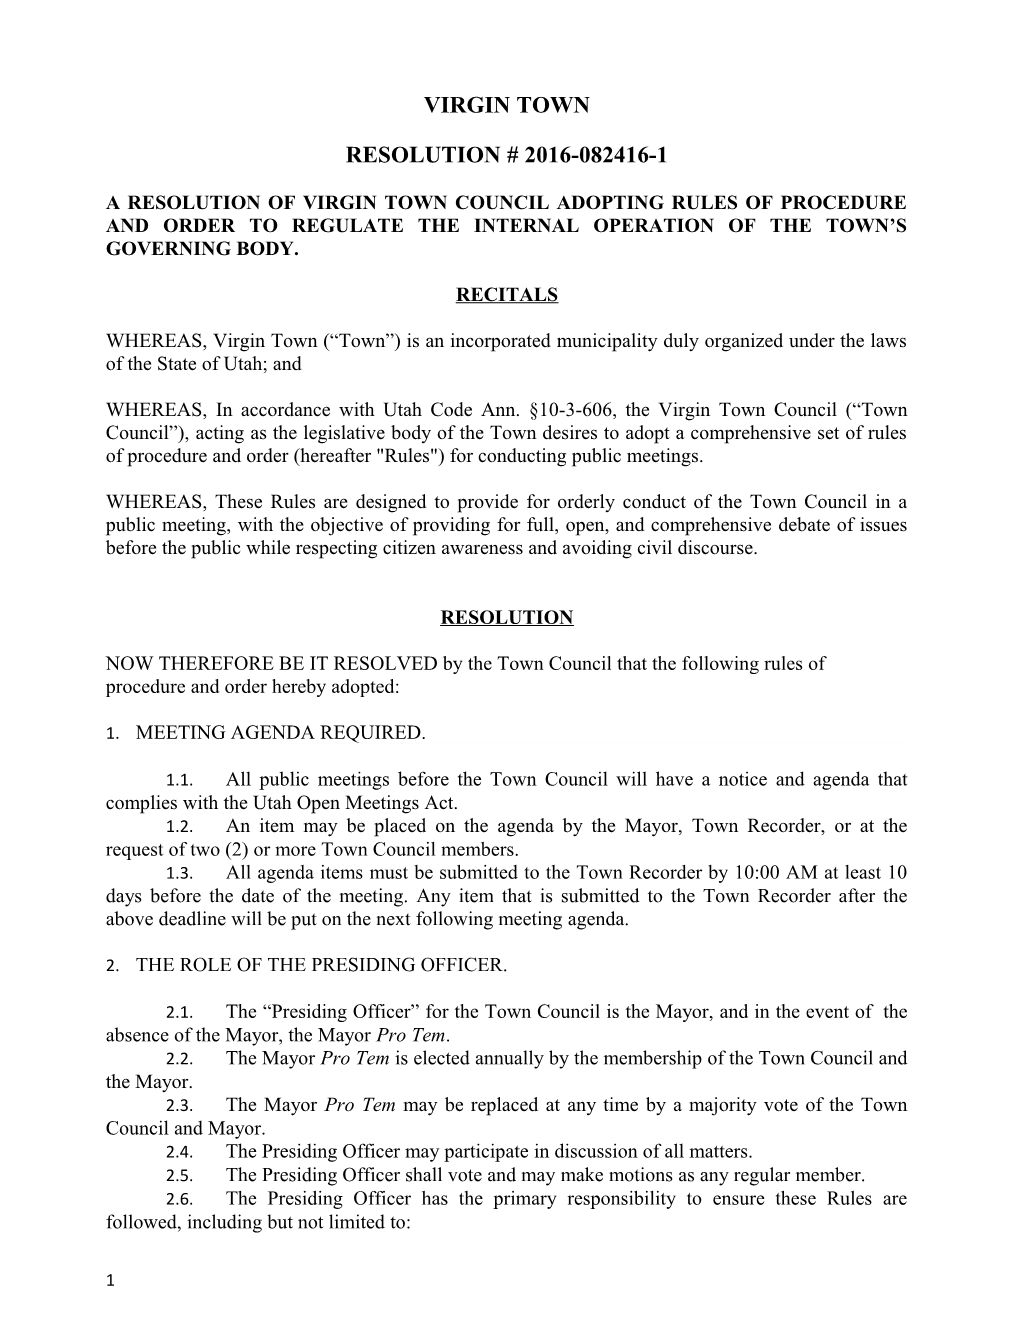 A Resolution of Virgin Town Council Adopting Rules of Procedure and Order to Regulate